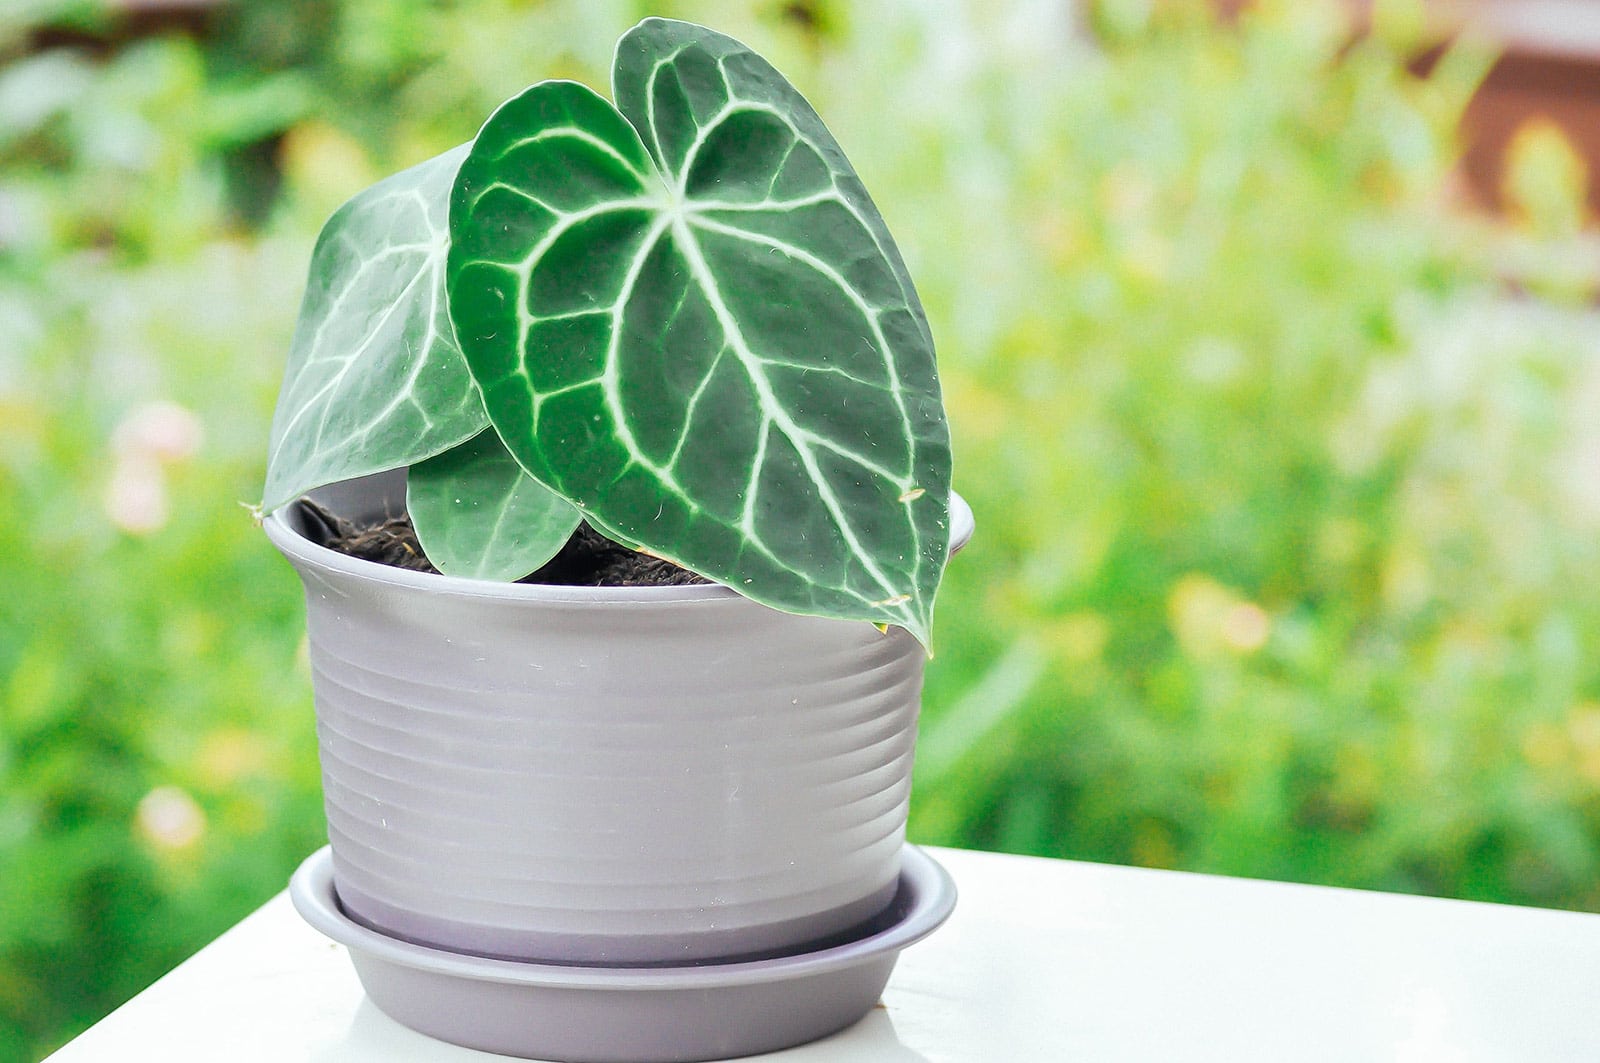 Young Anthurium clarinervium plant in a gray ceramic pot with saucer, shot outside in a green garden